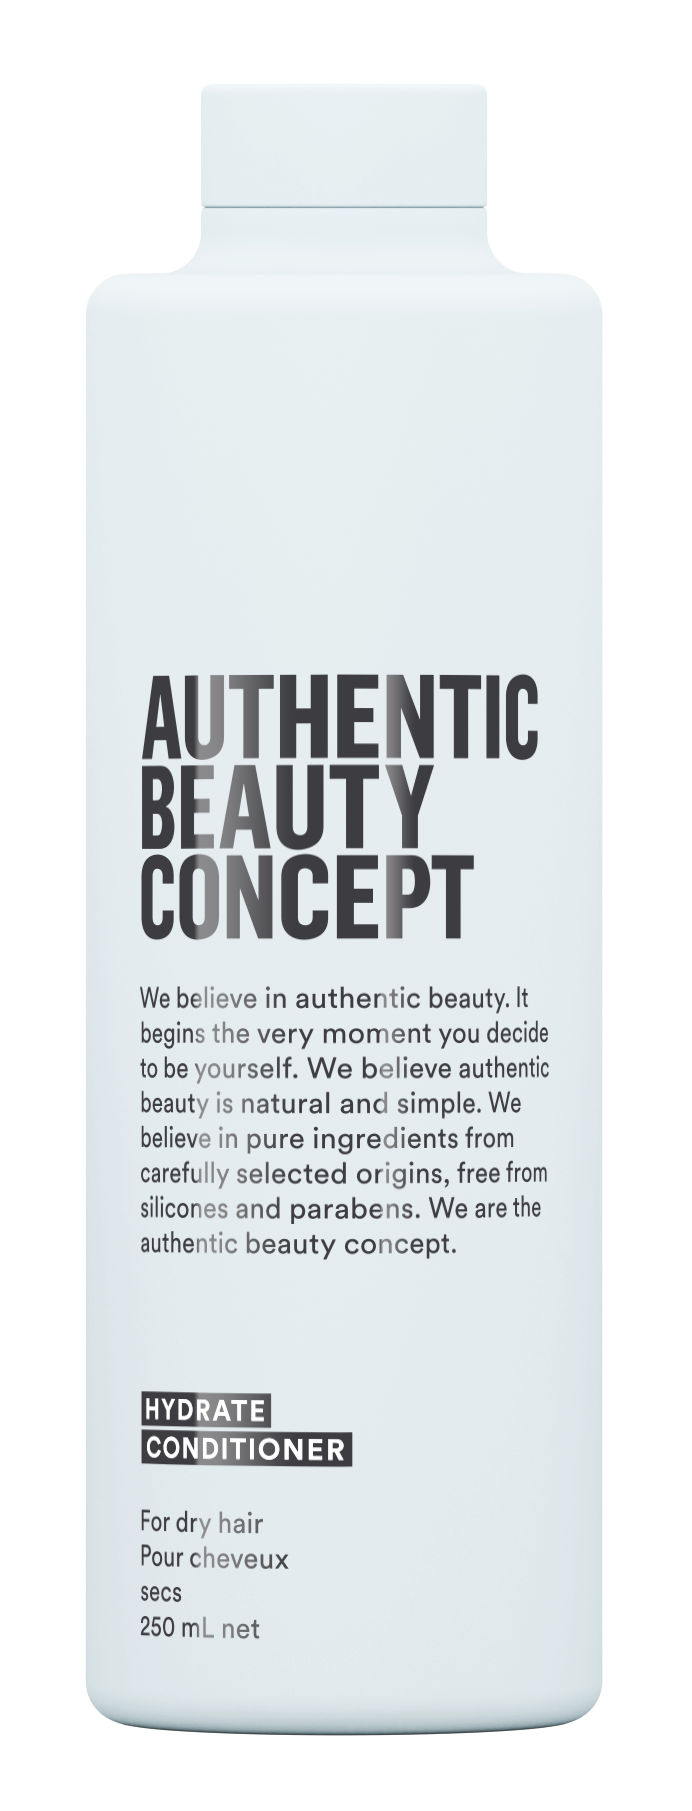 Authentic Beauty Concept - Hydrate Conditioner 250ml